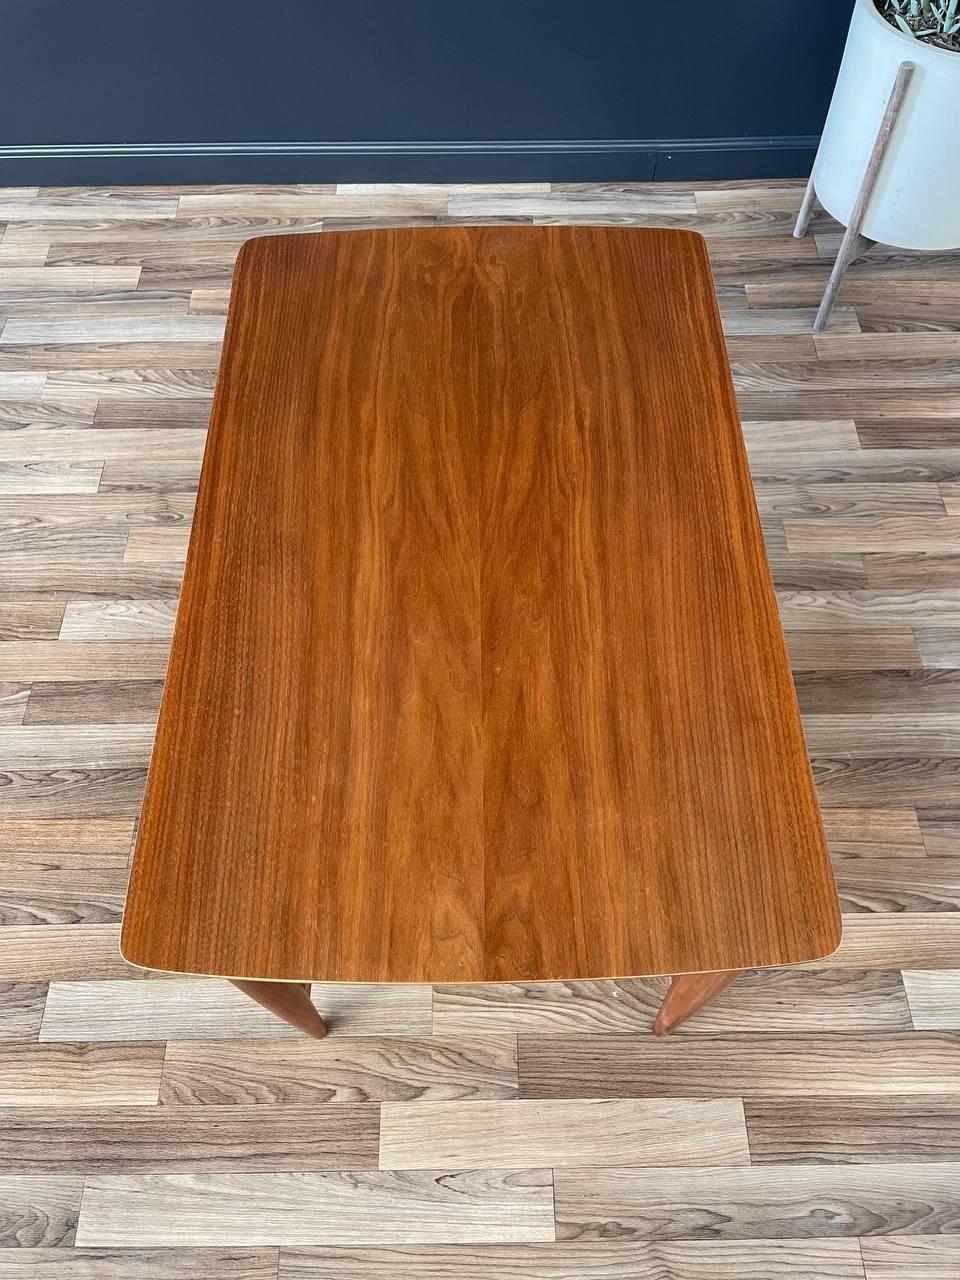 Mid-20th Century Newly Refinished - Mid-Century Modern Walnut Two-Tier Side Table by Mersman For Sale